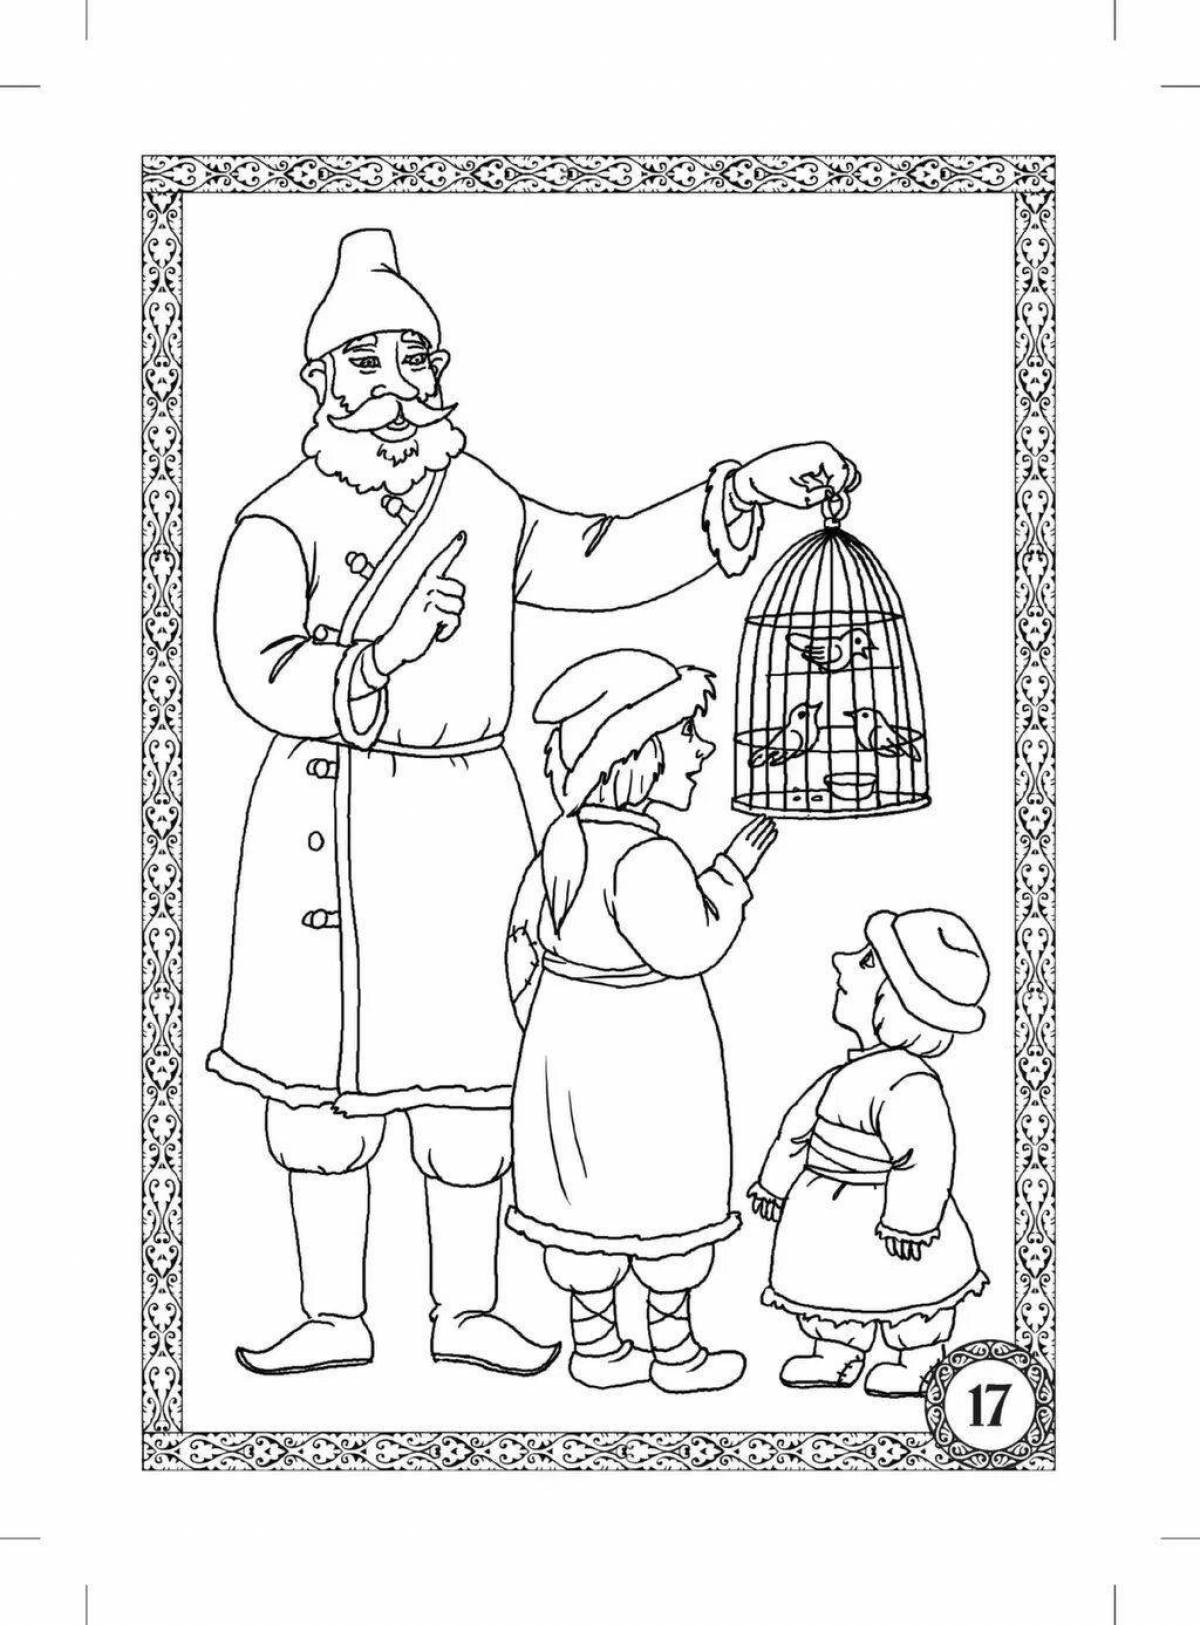 Exciting petr 1 coloring book for kids